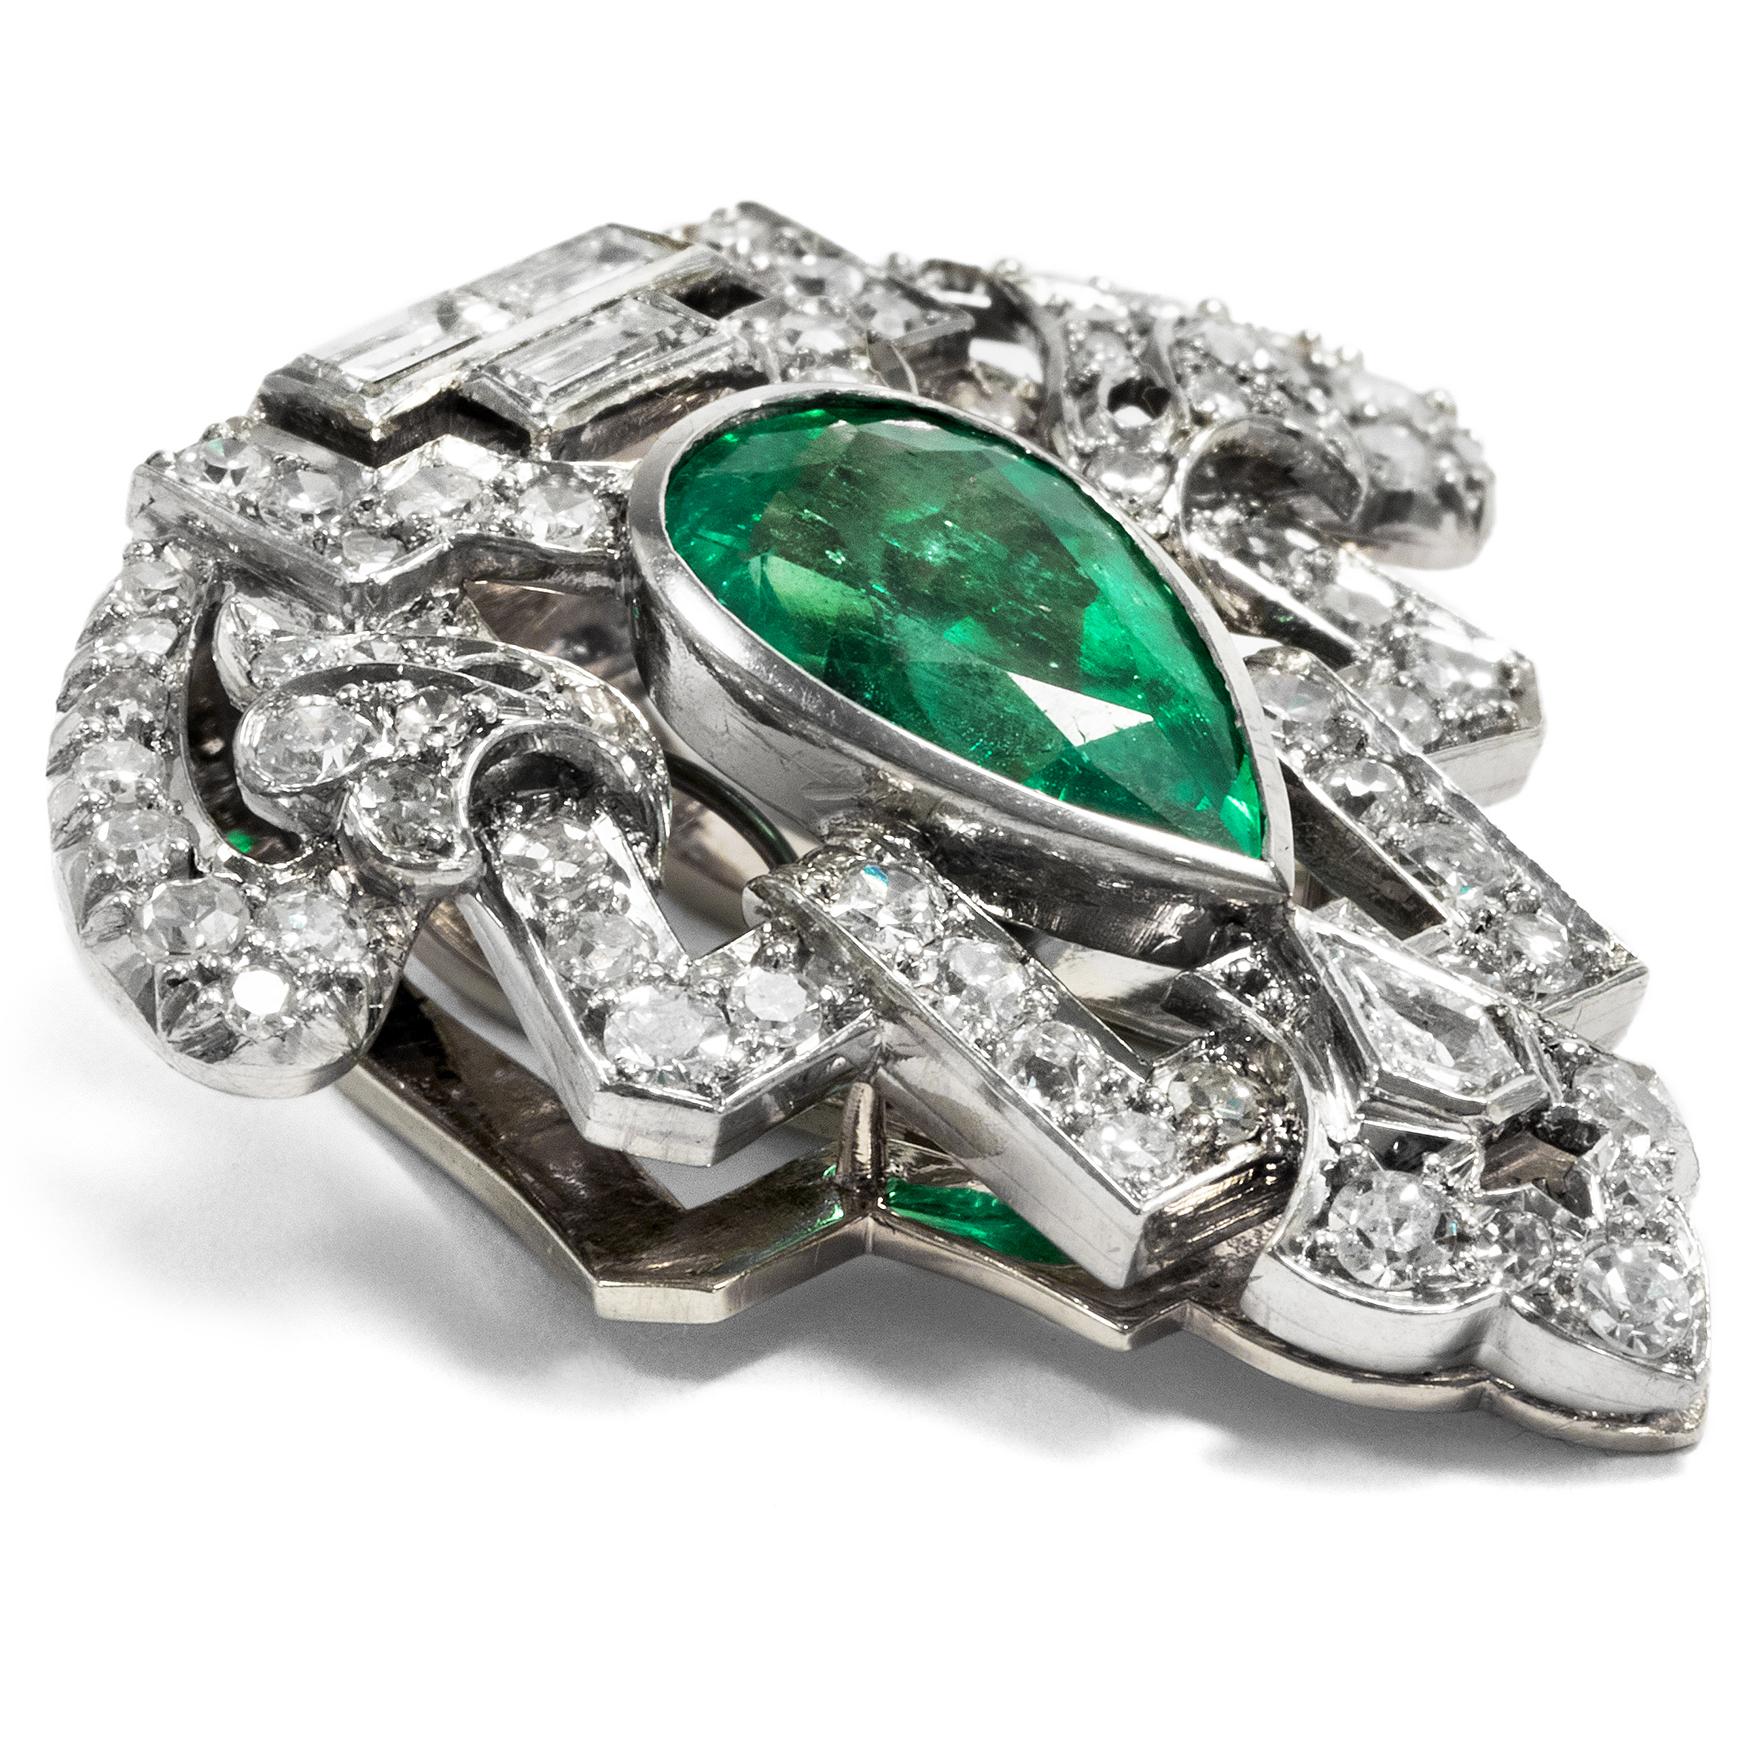 This clip brooch dates to the years around 1930 and embodies the modern spirit of the times par excellence. Gleaming diamonds and white platinum are united in an abstract triangular shape with a deep green emerald at its centre. The emerald is cut